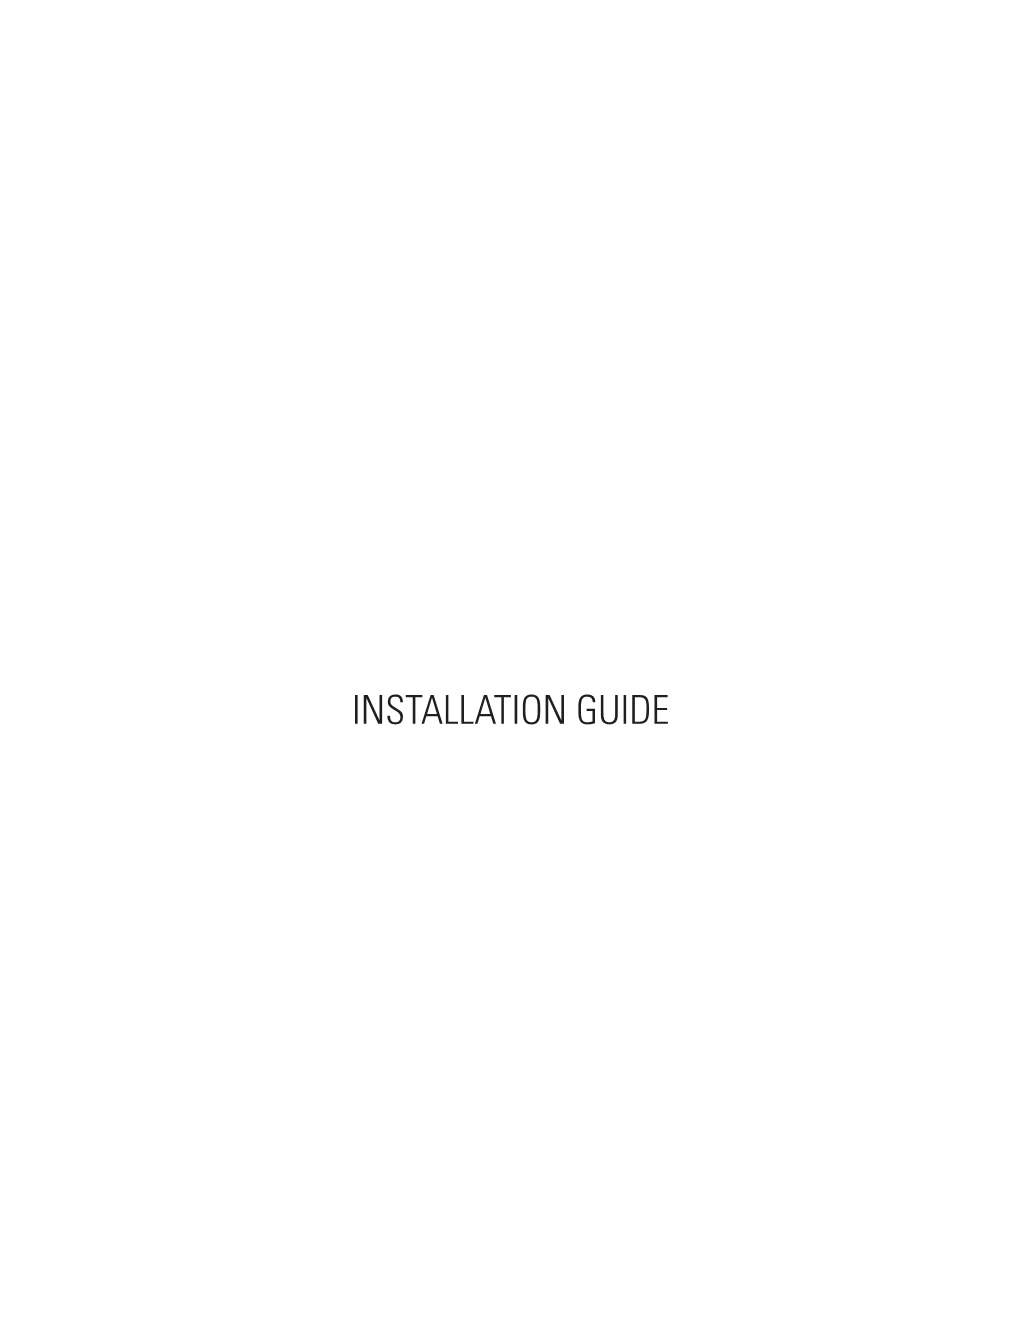 INSTALLATION GUIDE Ceiling Components: a Tin Ceiling Is Comprised of Two Primary Components and Two Optional Components